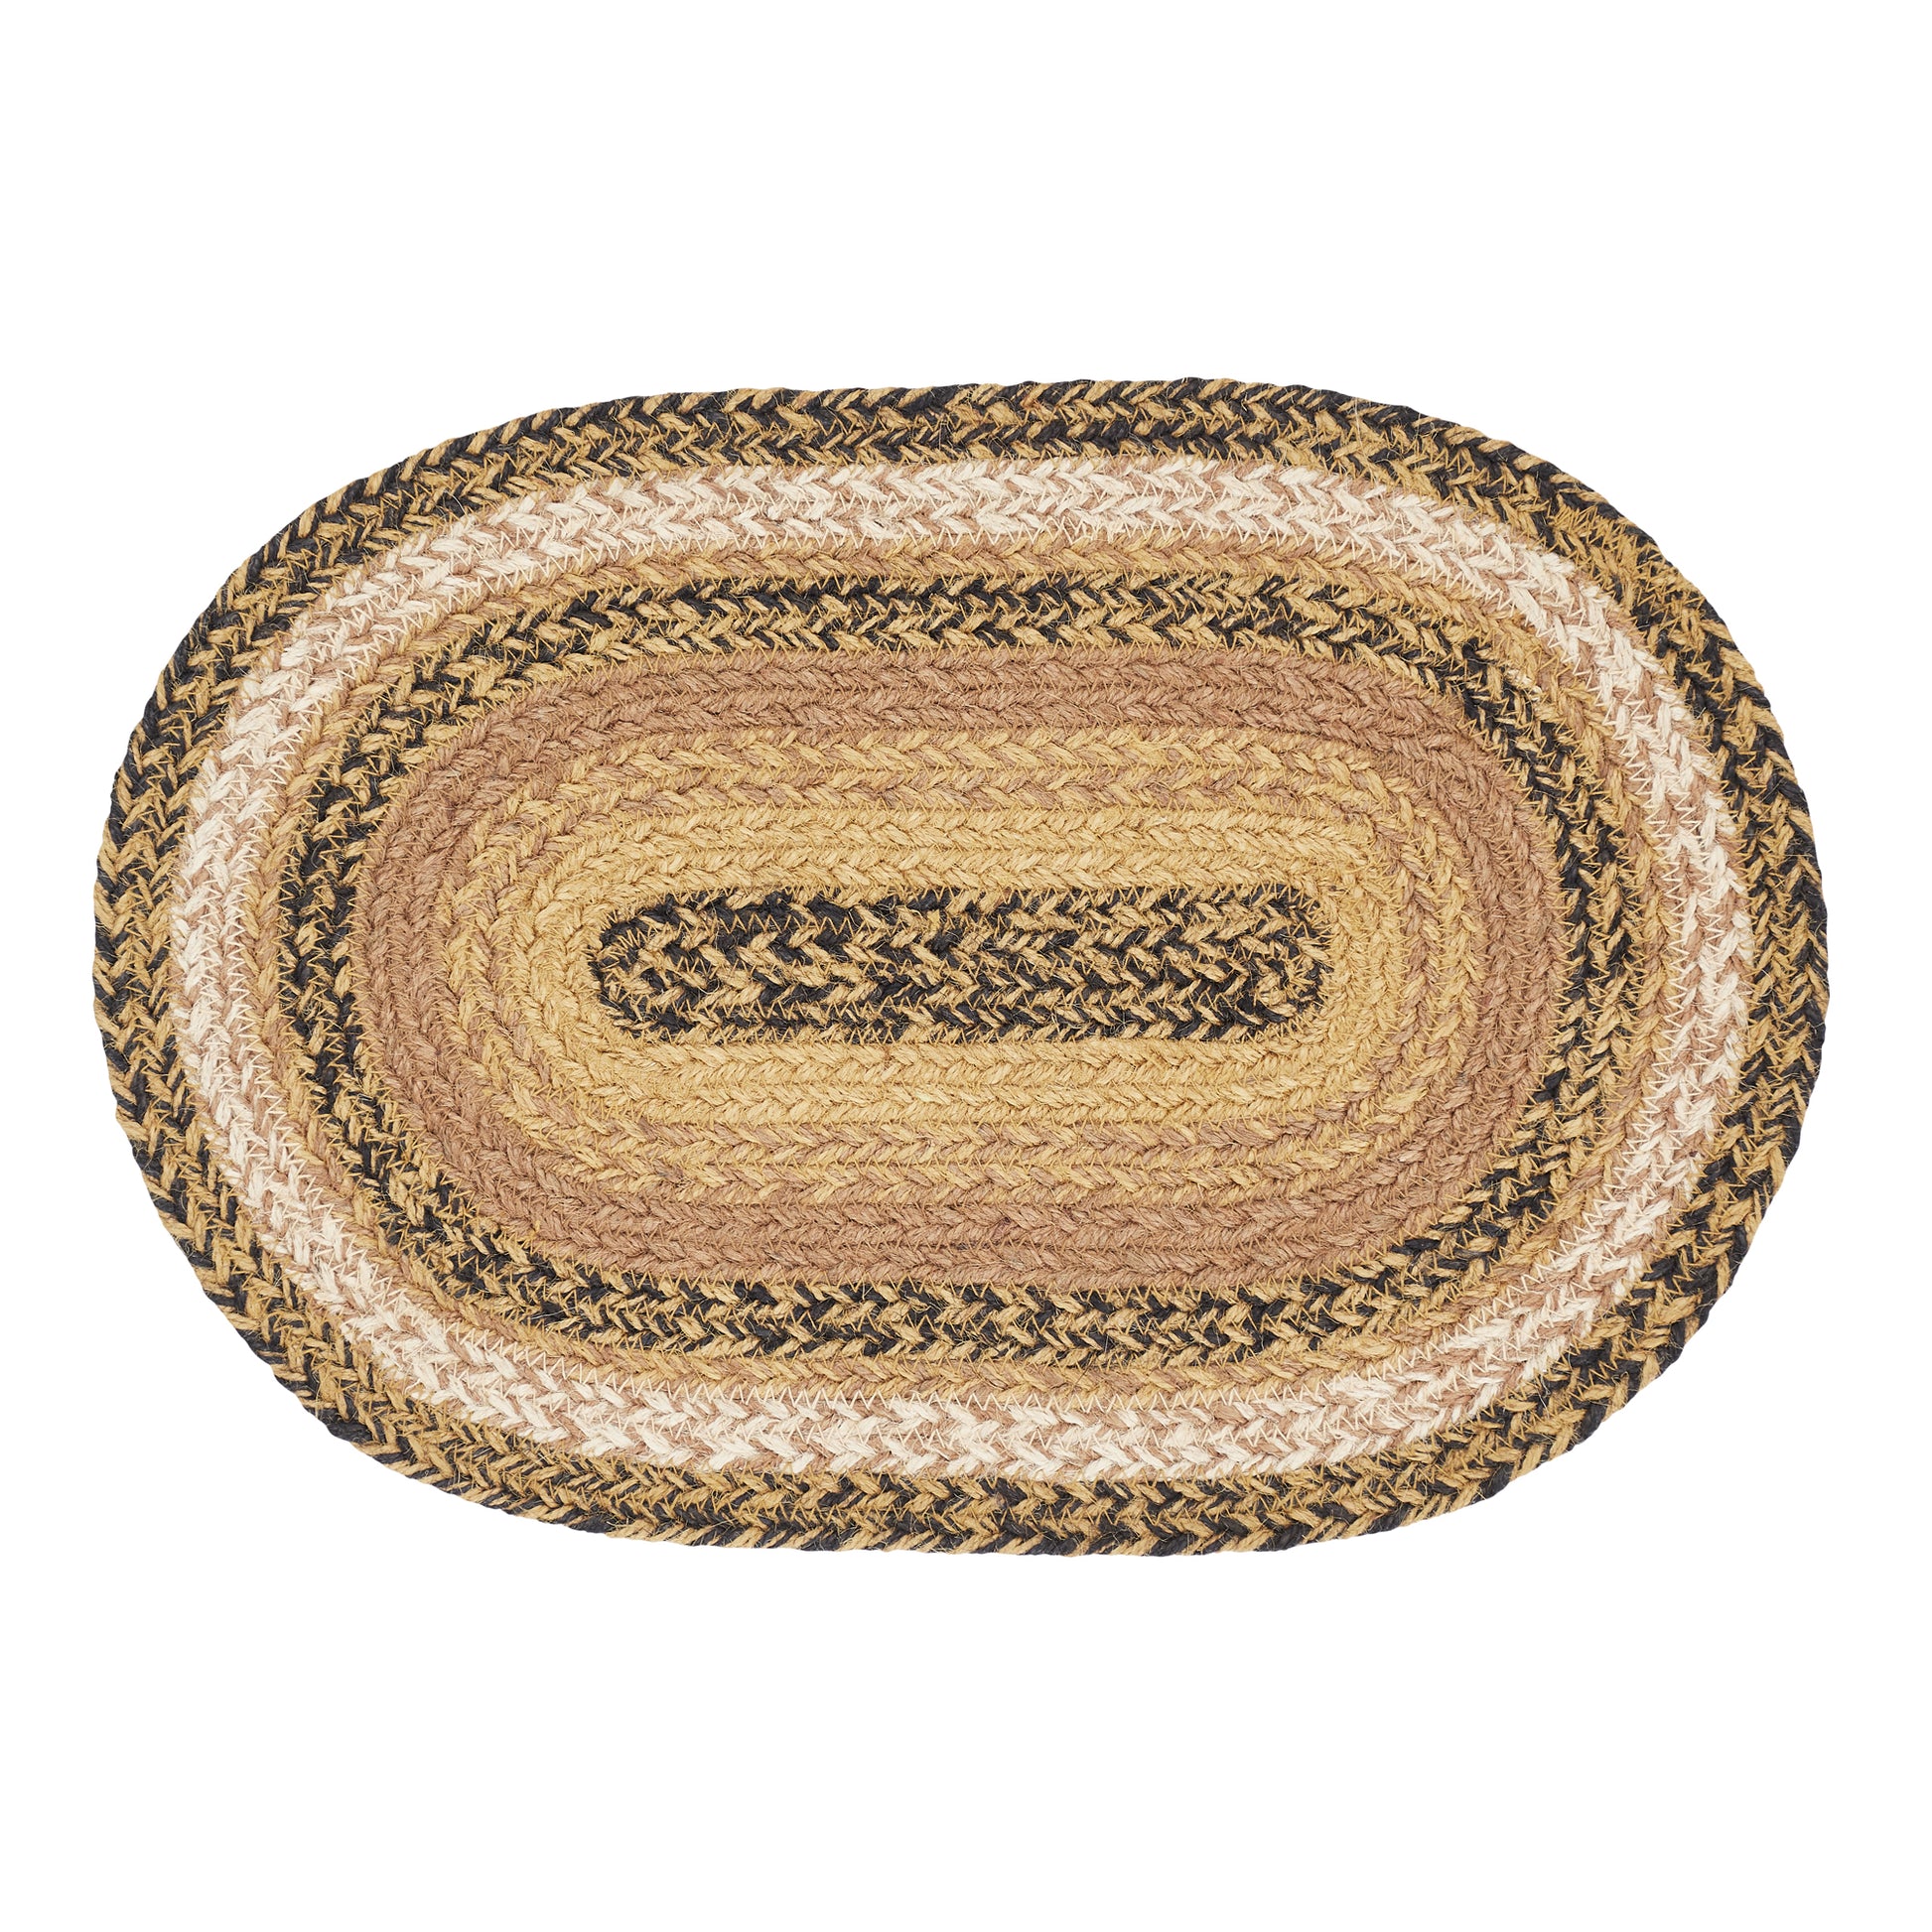 81386-Kettle-Grove-Jute-Oval-Placemat-10x15-image-4